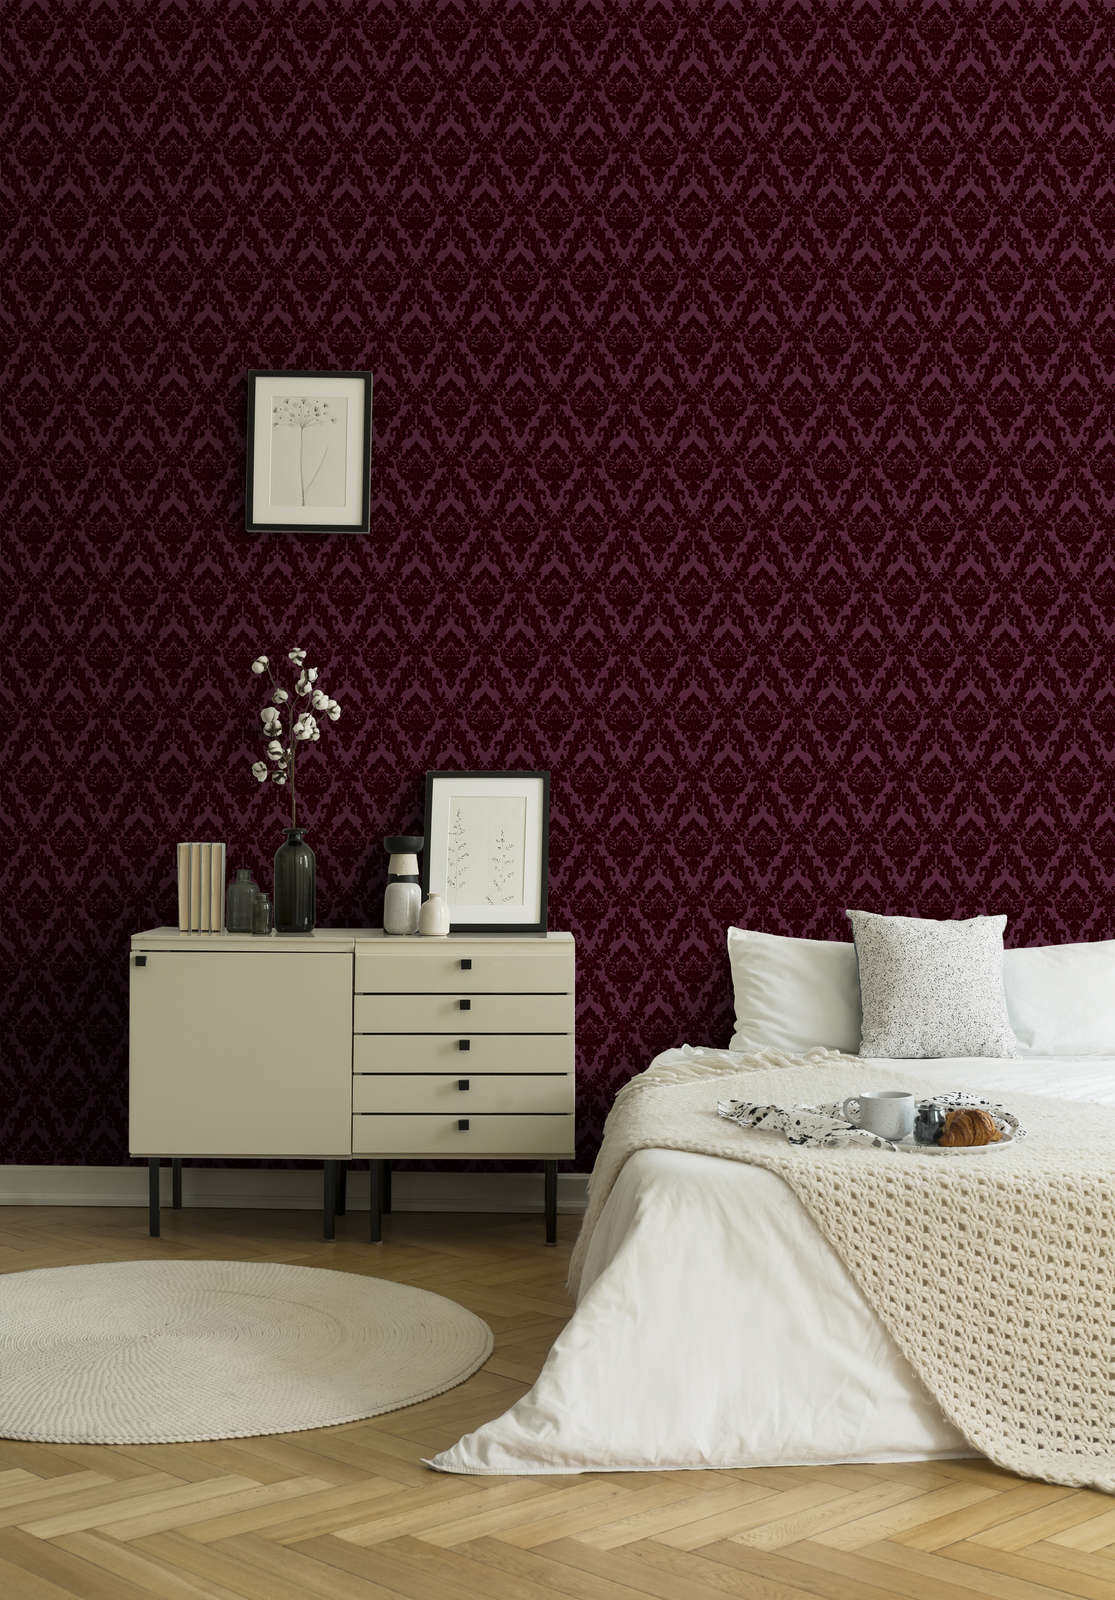             Baroque wallpaper black & purple with gothic design - red
        